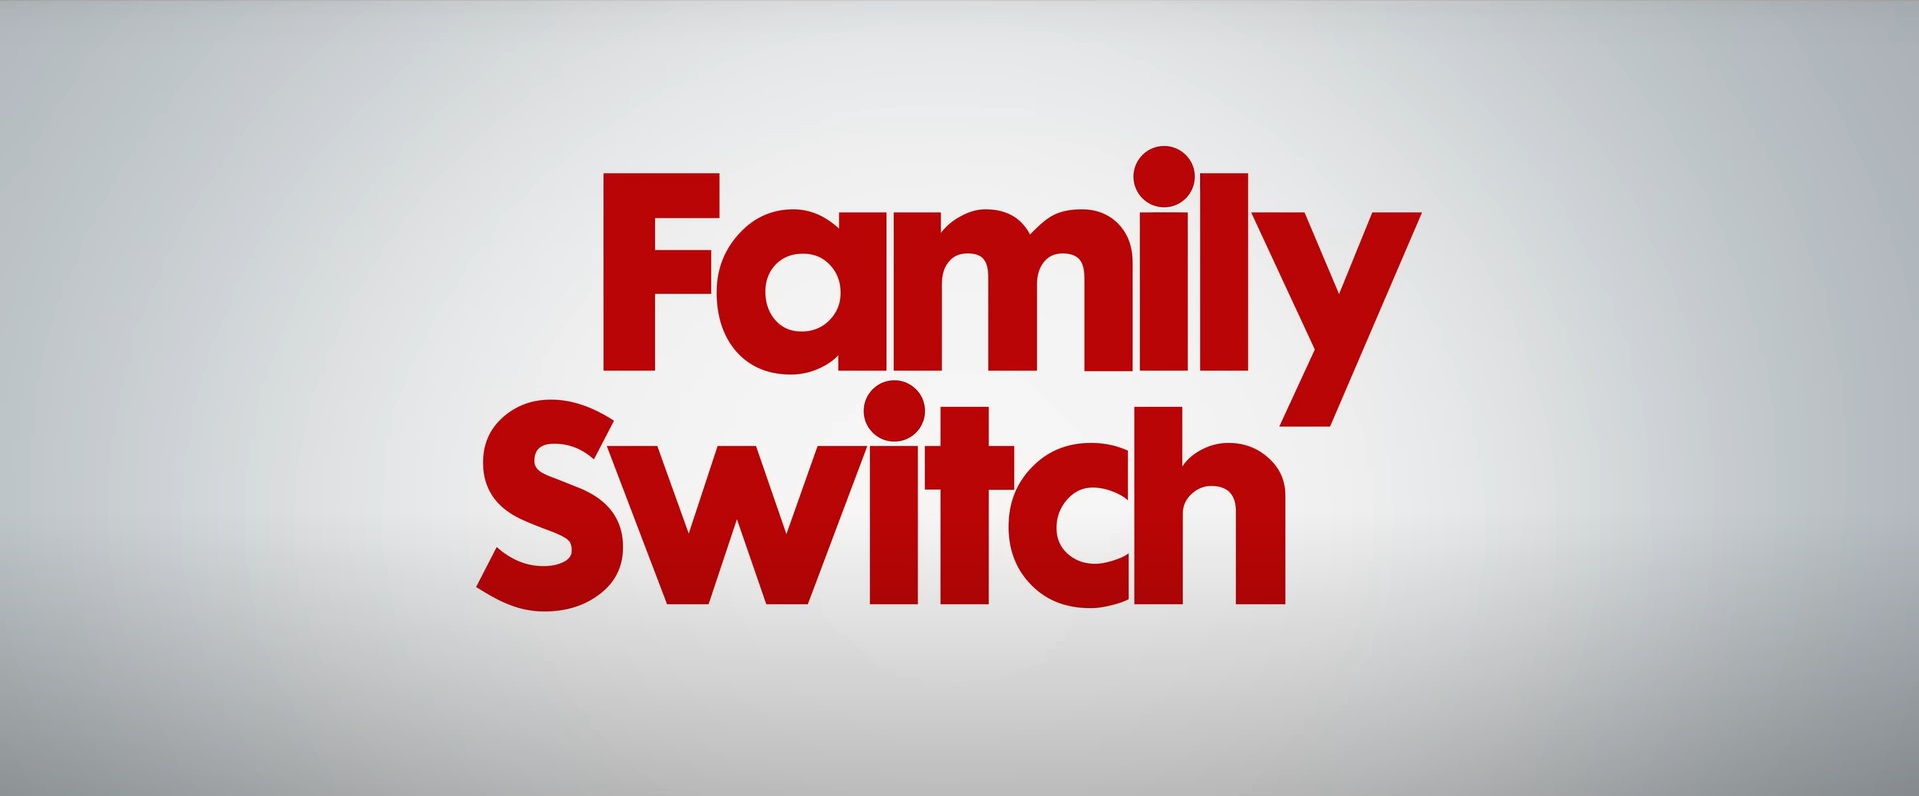 You are currently viewing Family Switch | Jennifer Garner and Ed Helms